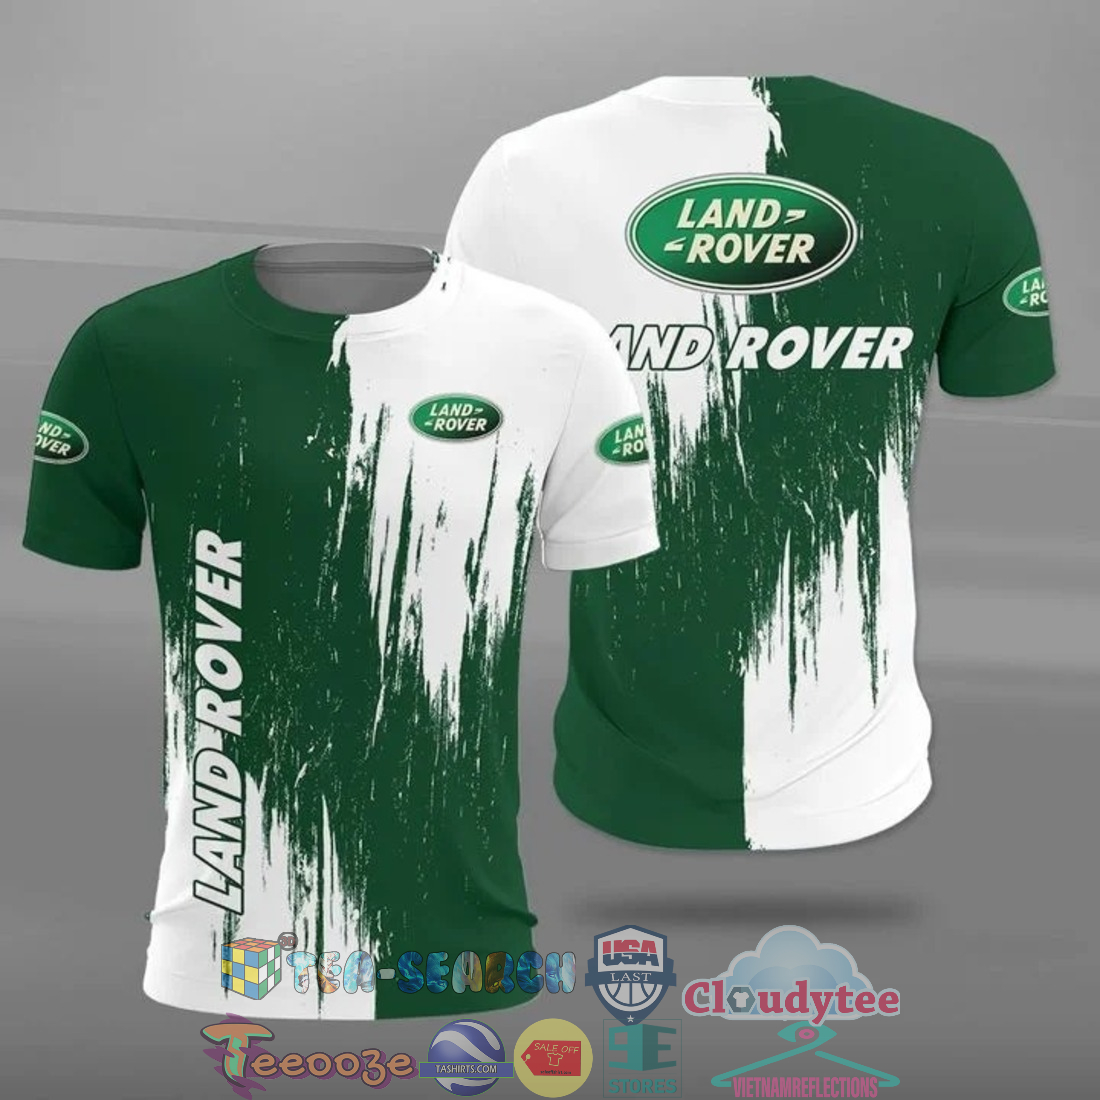 Land Rover ver 2 all over printed t-shirt hoodie